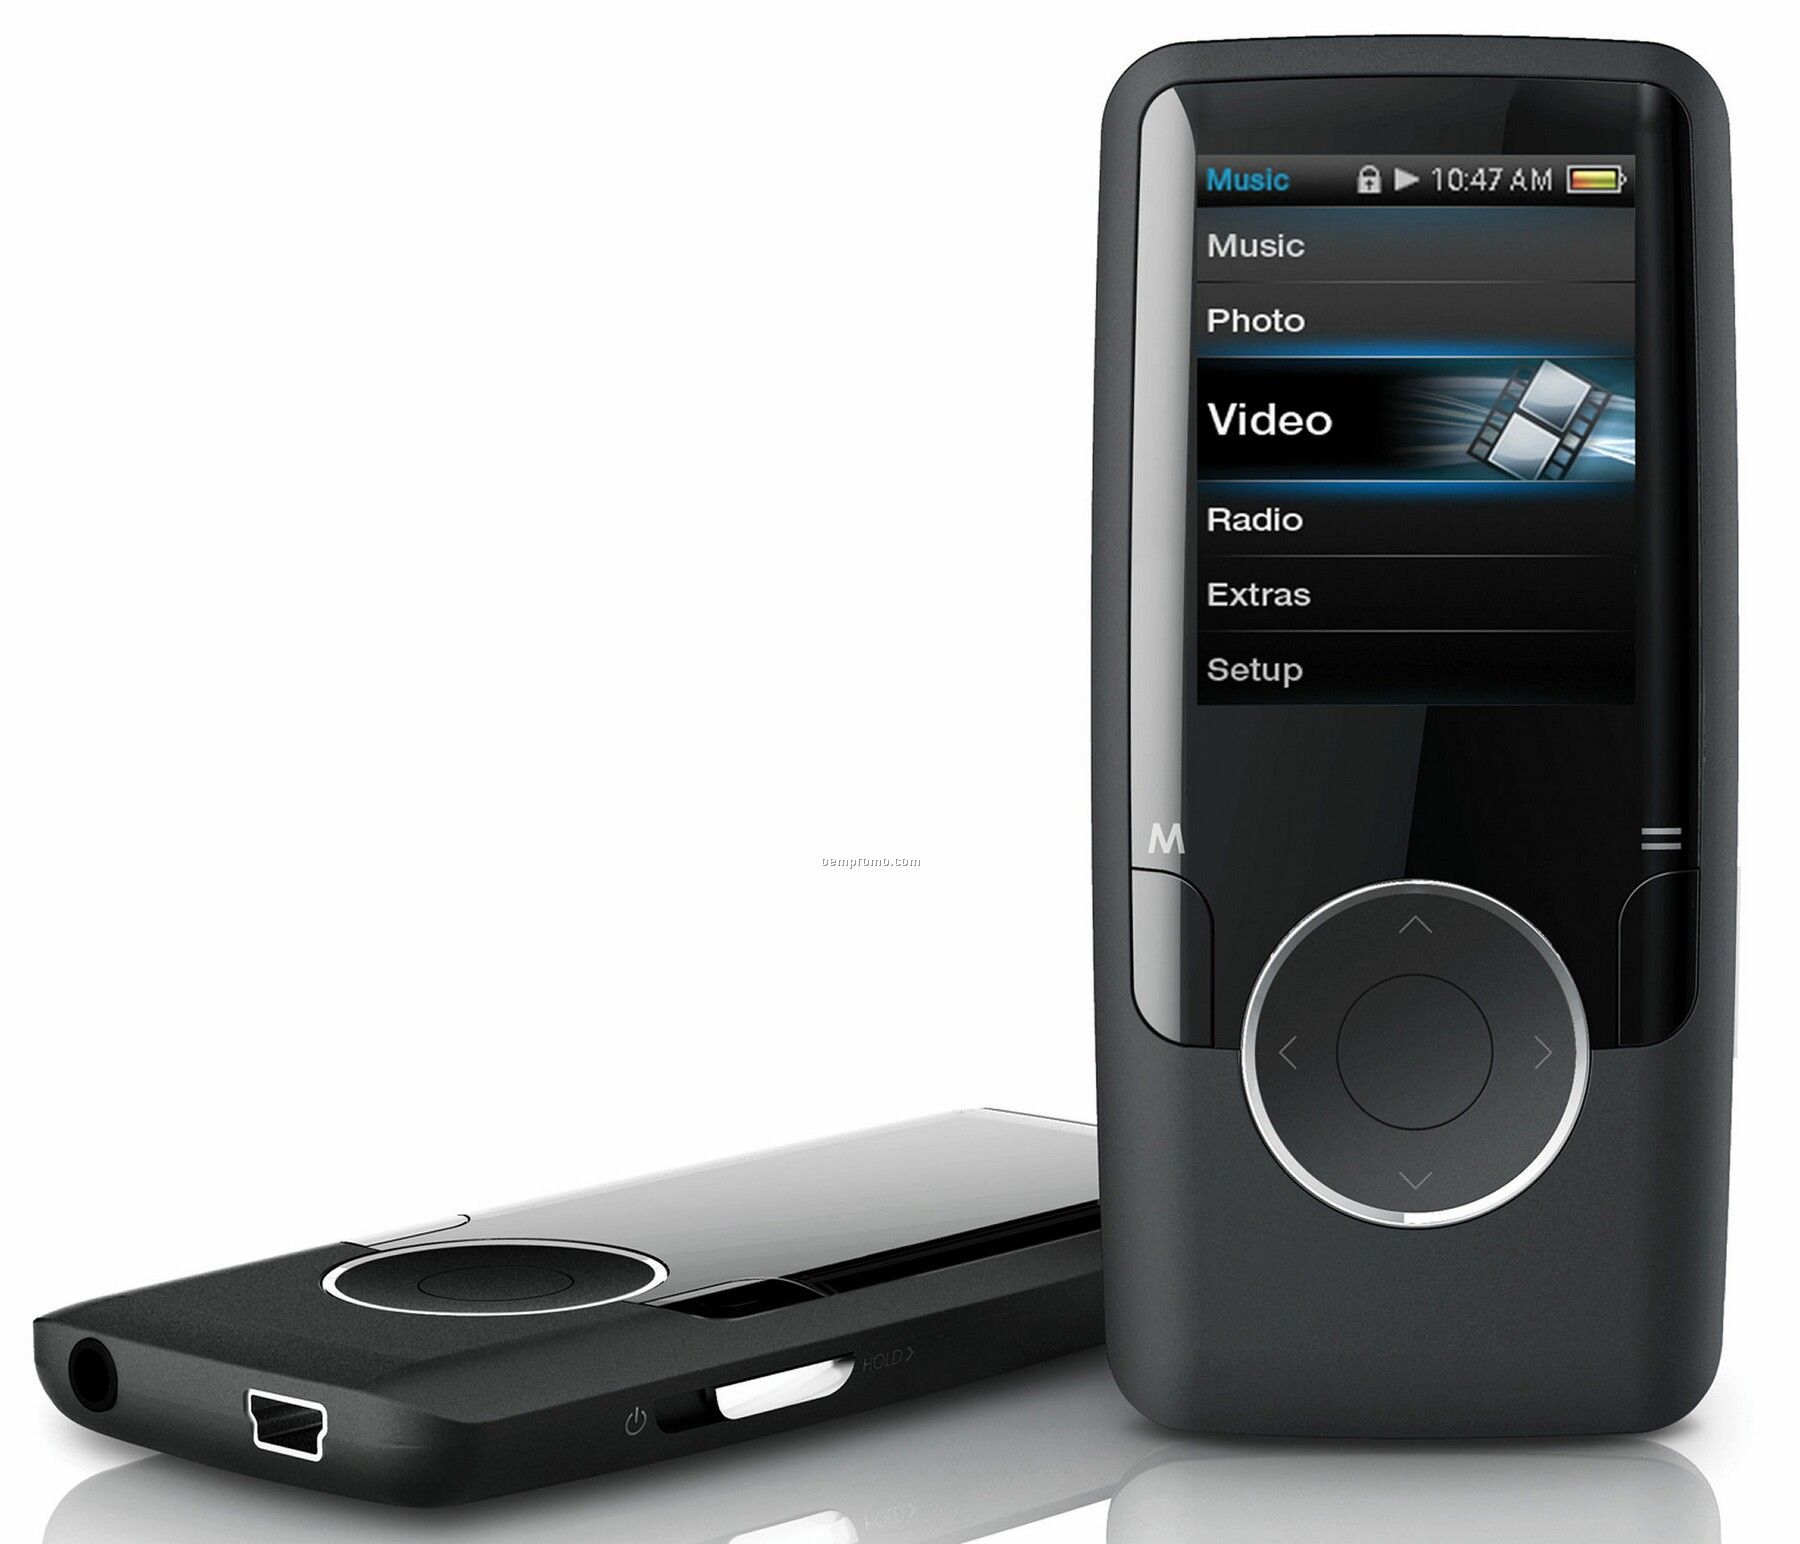 Coby 4gb 1.8" Video Mp3 Player